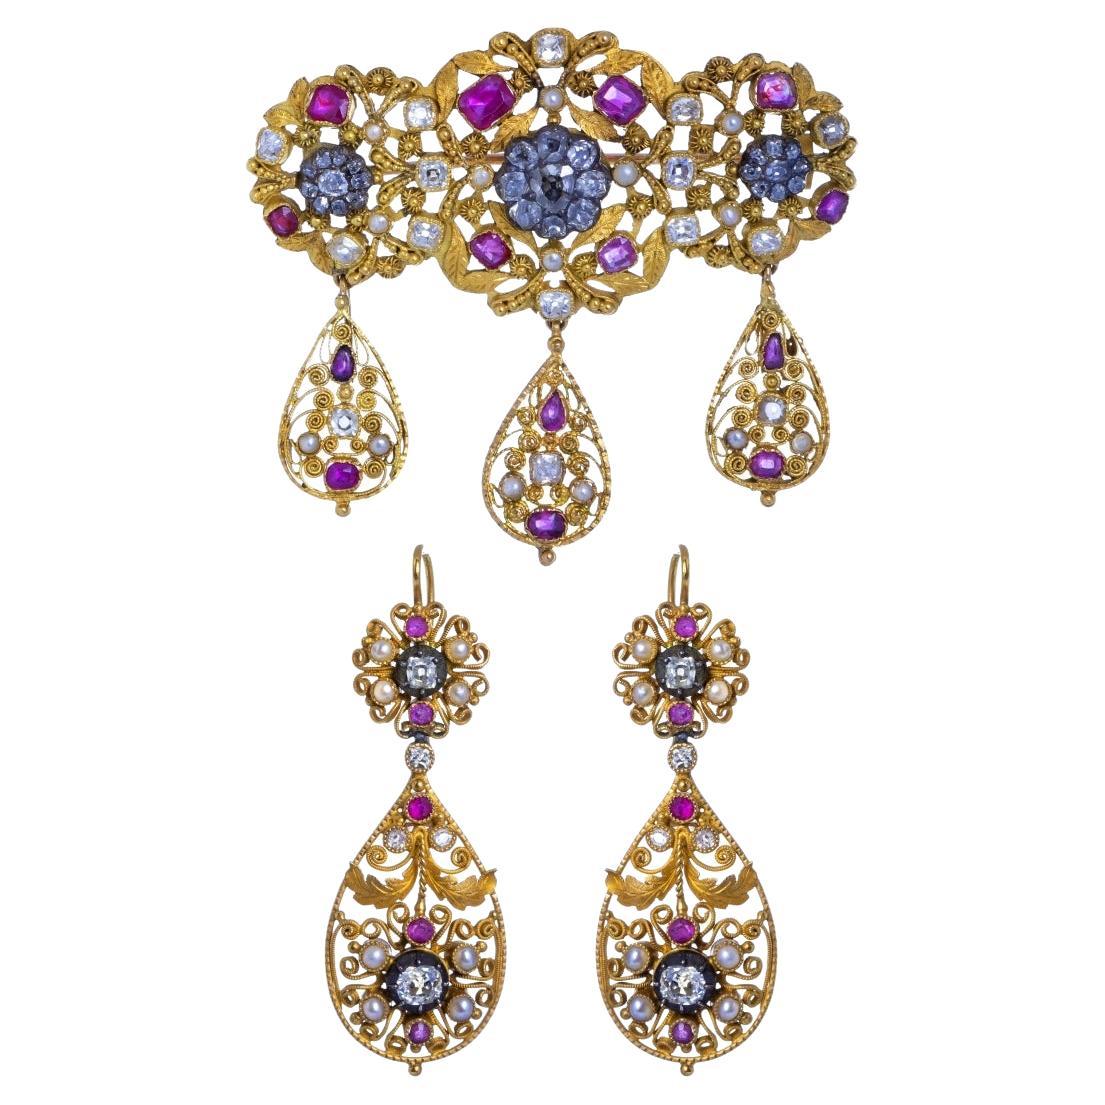 Pin and Pair of Italian Gold Earrings, 19th Century